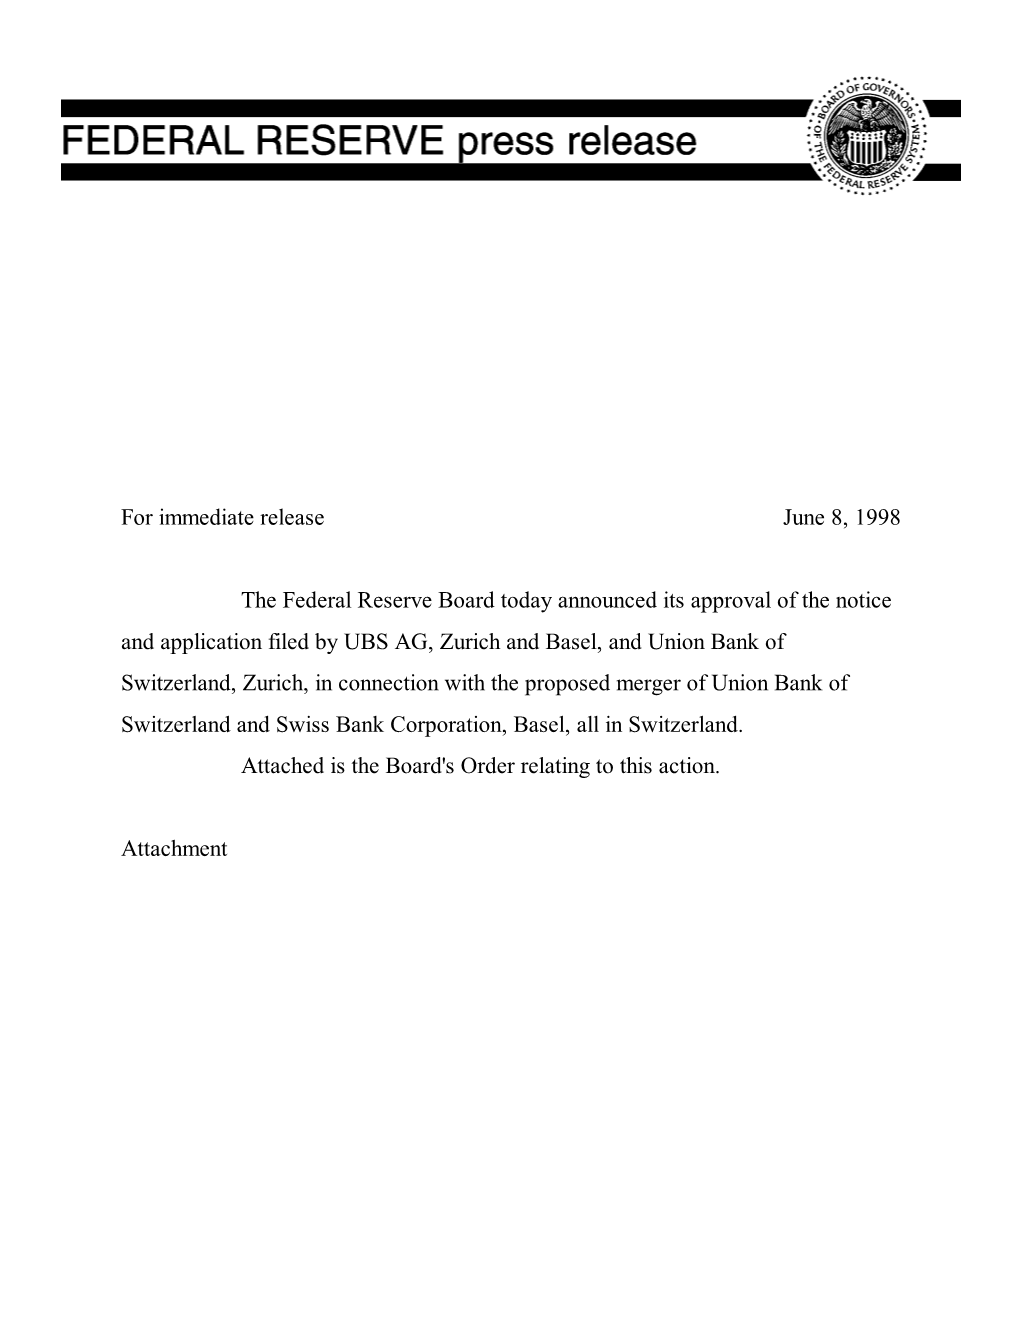 For Immediate Release June 8, 1998 the Federal Reserve Board Today Announced Its Approval of the Notice and Application Filed By